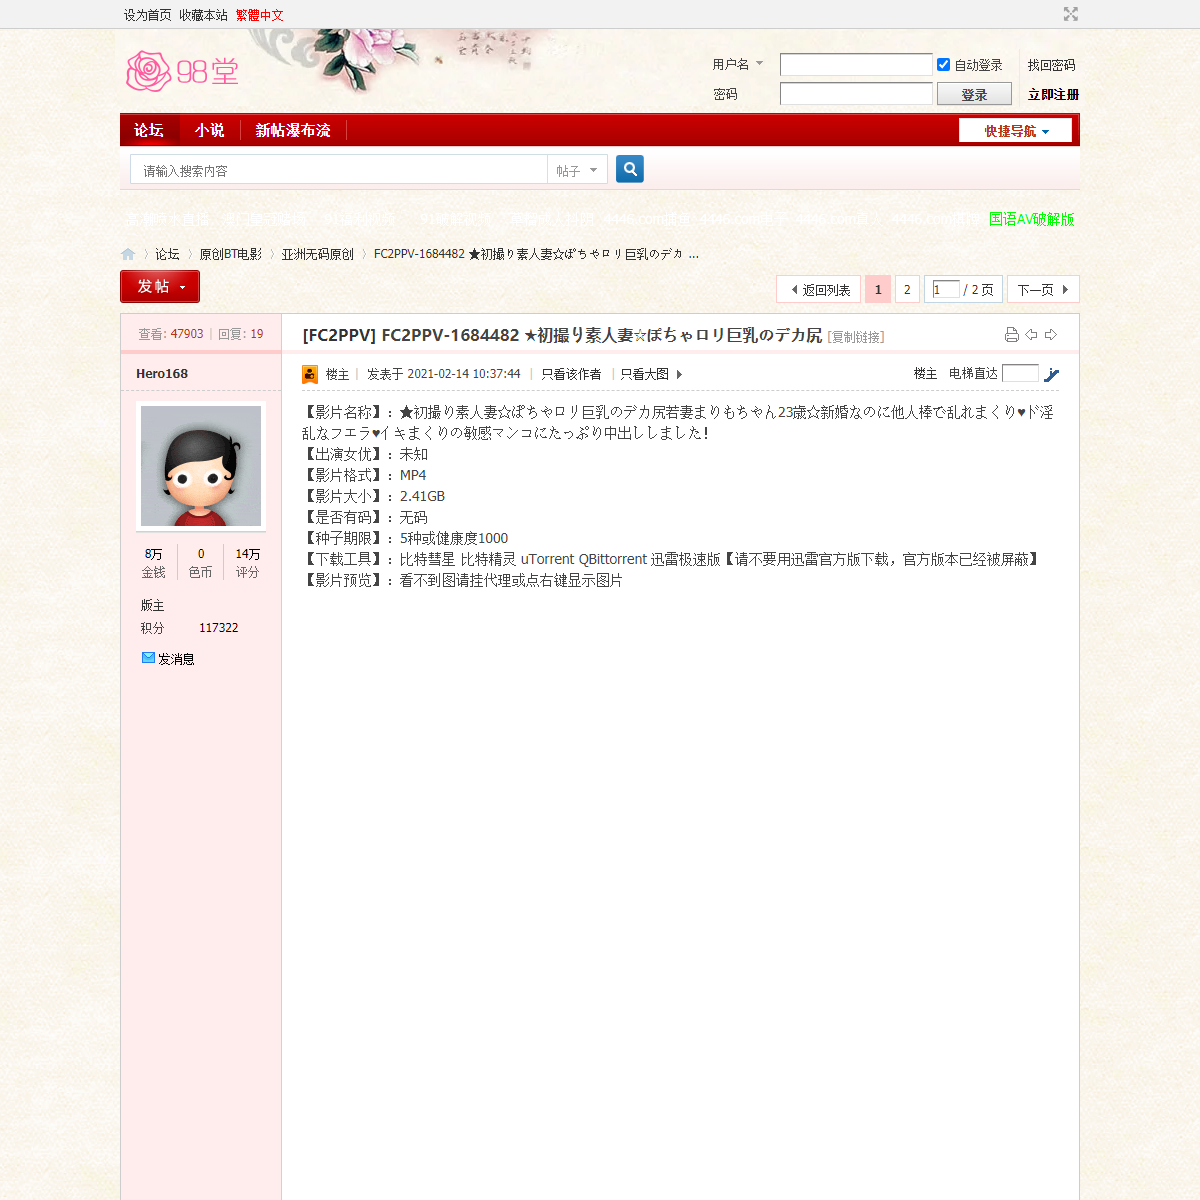 A complete backup of https://www.sehuatang.net/thread-480093-1-1.html